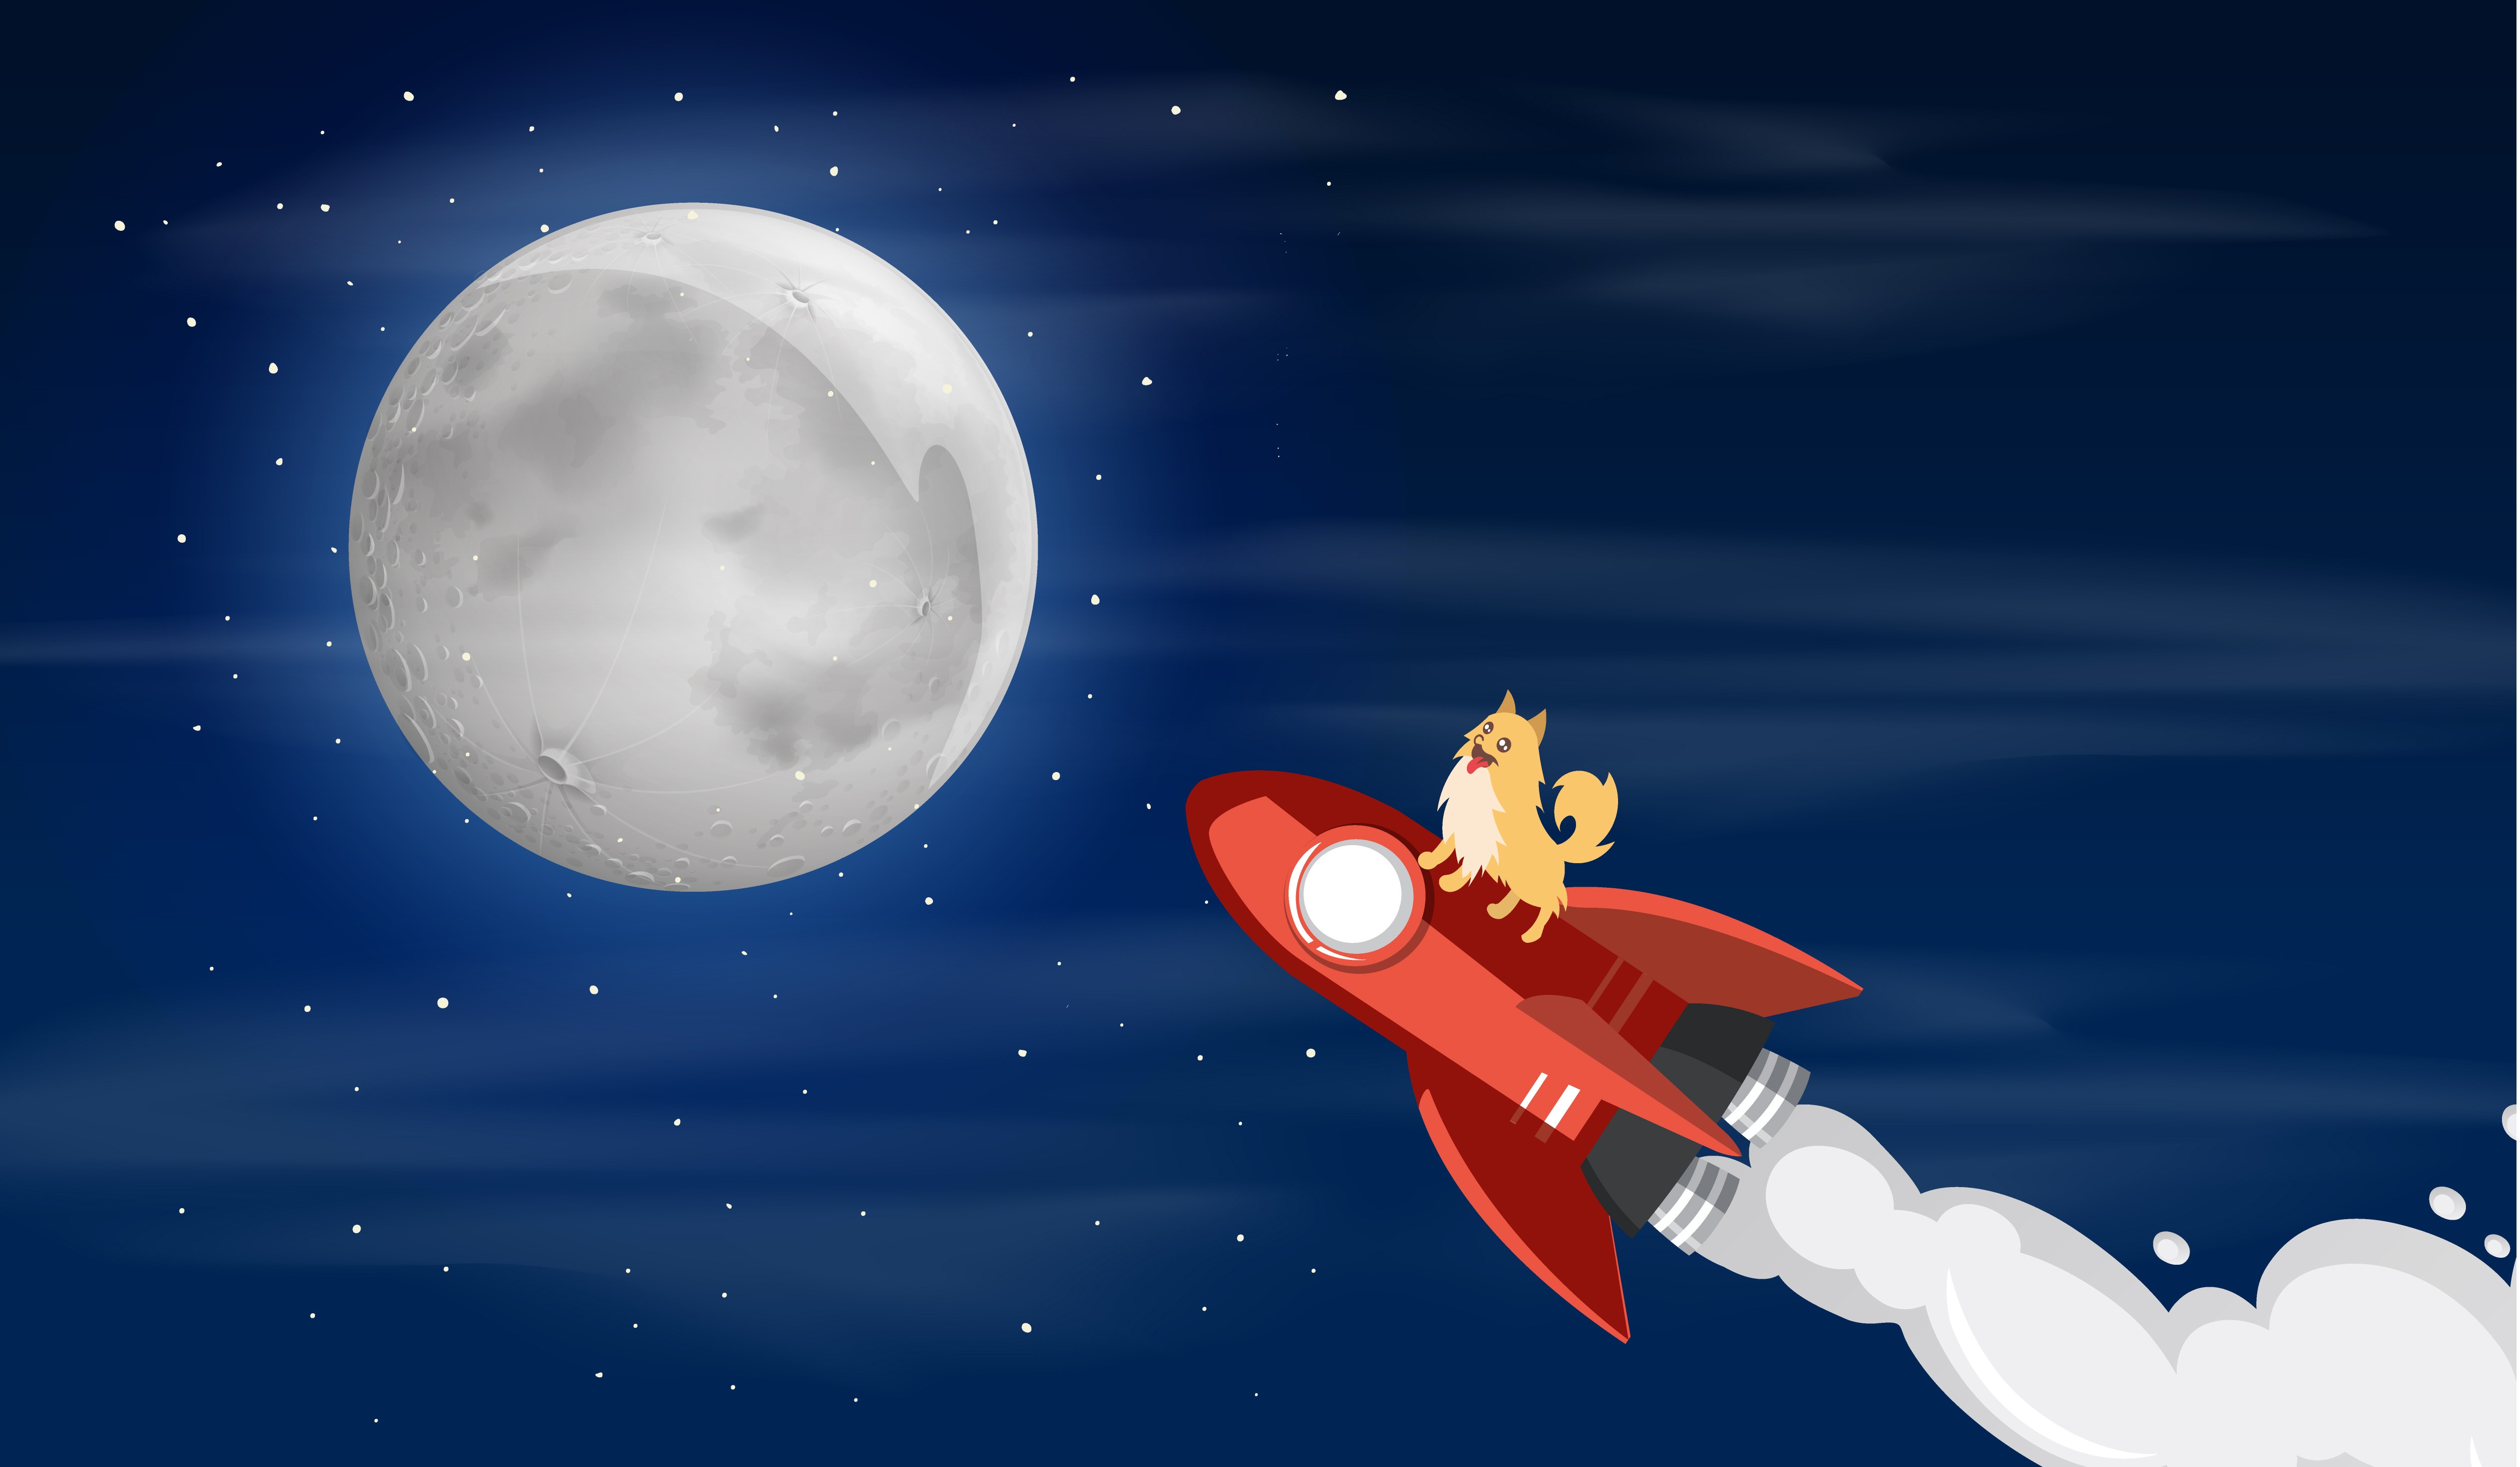 Bitcoin, Ethereum And Dogecoin Take Flight Into The Weekend: Here's What's On Tap For The Cryptos